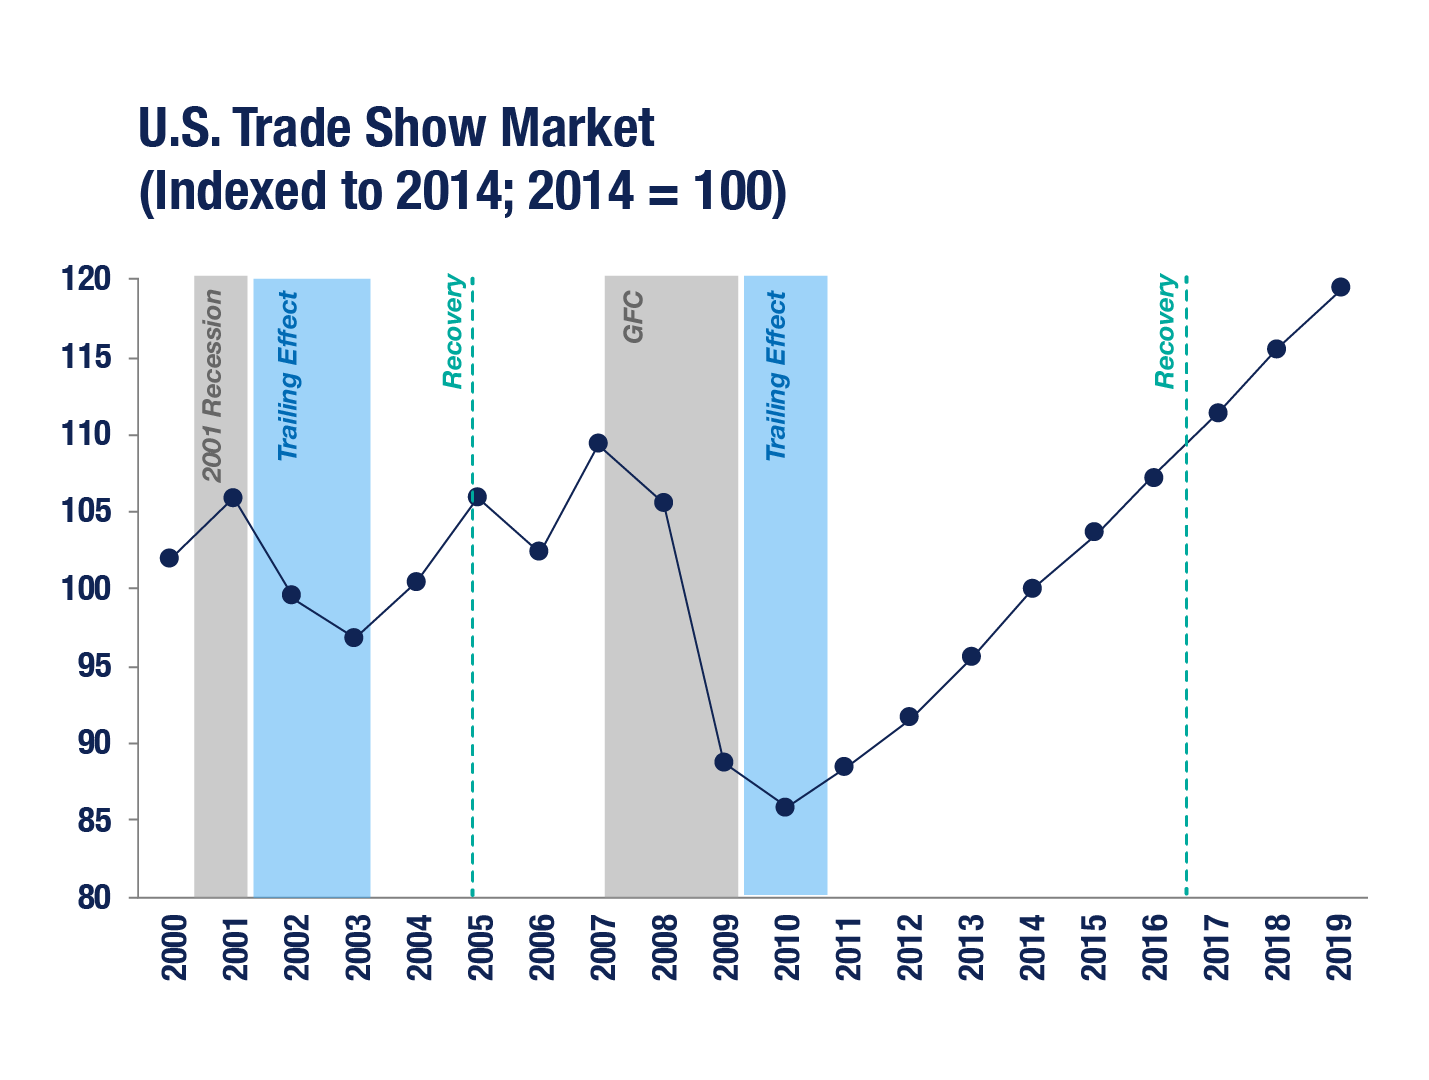 A graph showing the U.S. trade show market from 2000-2017. The Y-axis is the baseline starting at 100 as a measure for economic events while the X-axis is the year. Trends indicate drops during recent recessions with a trailing effect for 1-2 years, followed by a sharp uptick in events during the recovery periods.